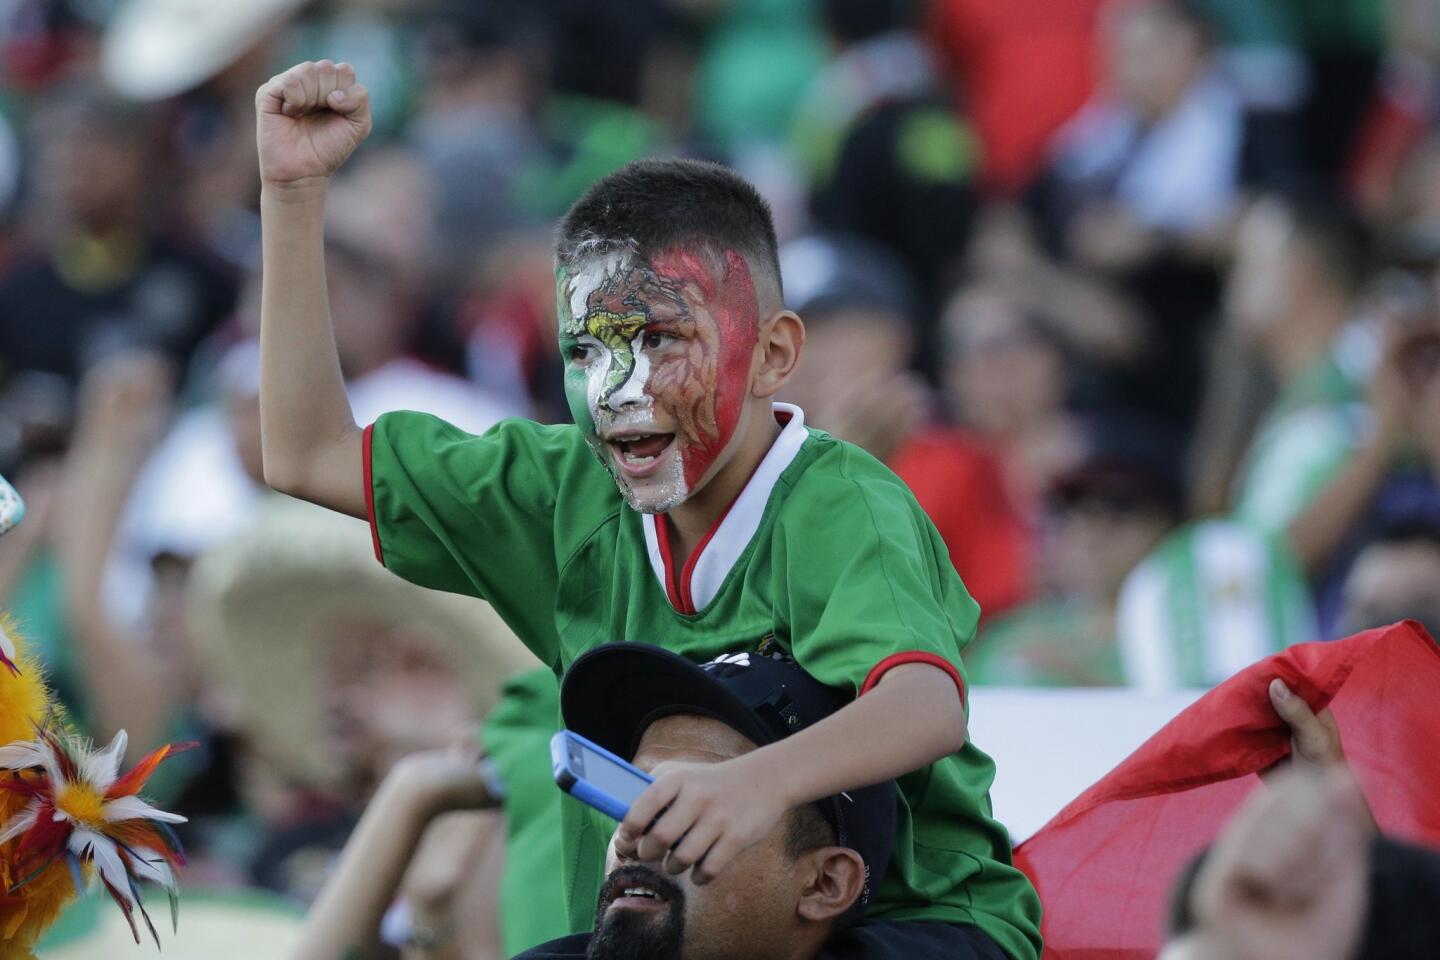 A young fan of Mexico cheers prior to the CONCACAF Confederations Cup playoff soccer match between Mexico and United States at the Rose Bowl Stadium, in Pasadena , Calif. Saturday, Oct. 10, 2015, (AP Photo/Jae C. Hong)